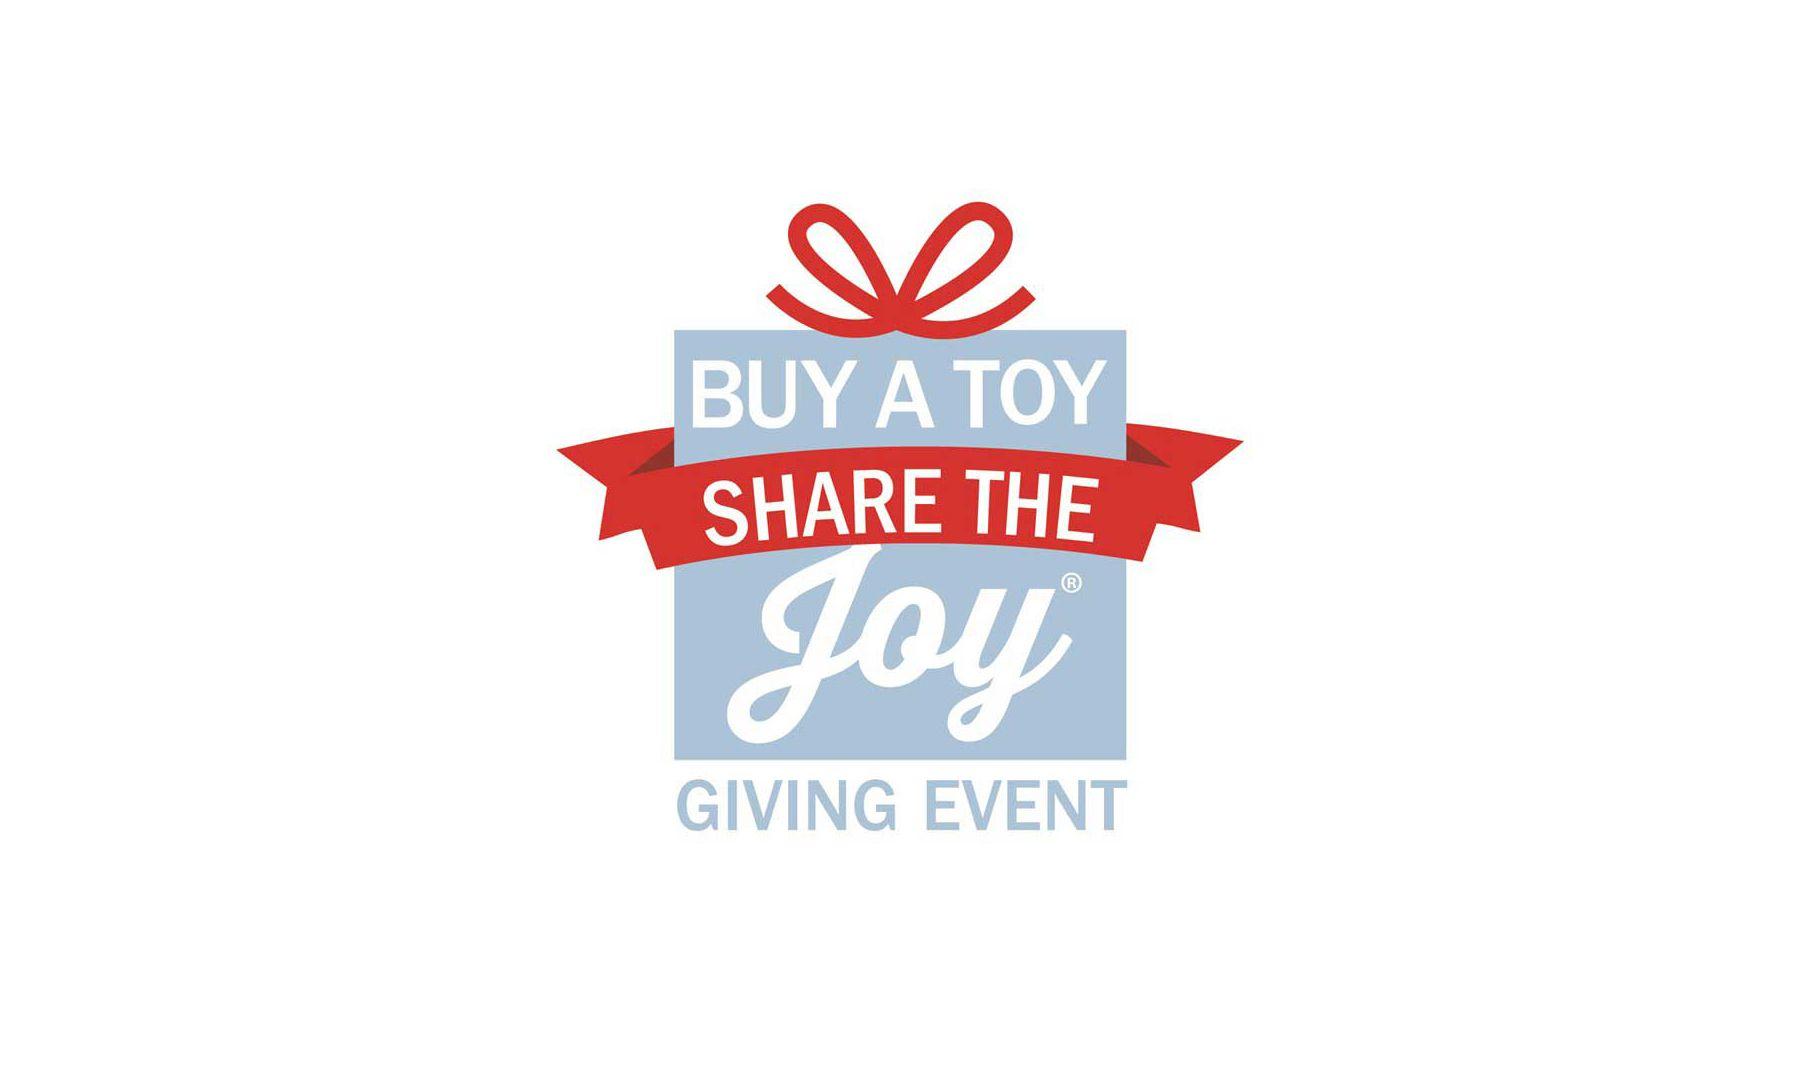 Mejier Logo - Meijer To Donate Up To $400K Through 'Buy A Toy, Share The Joy'